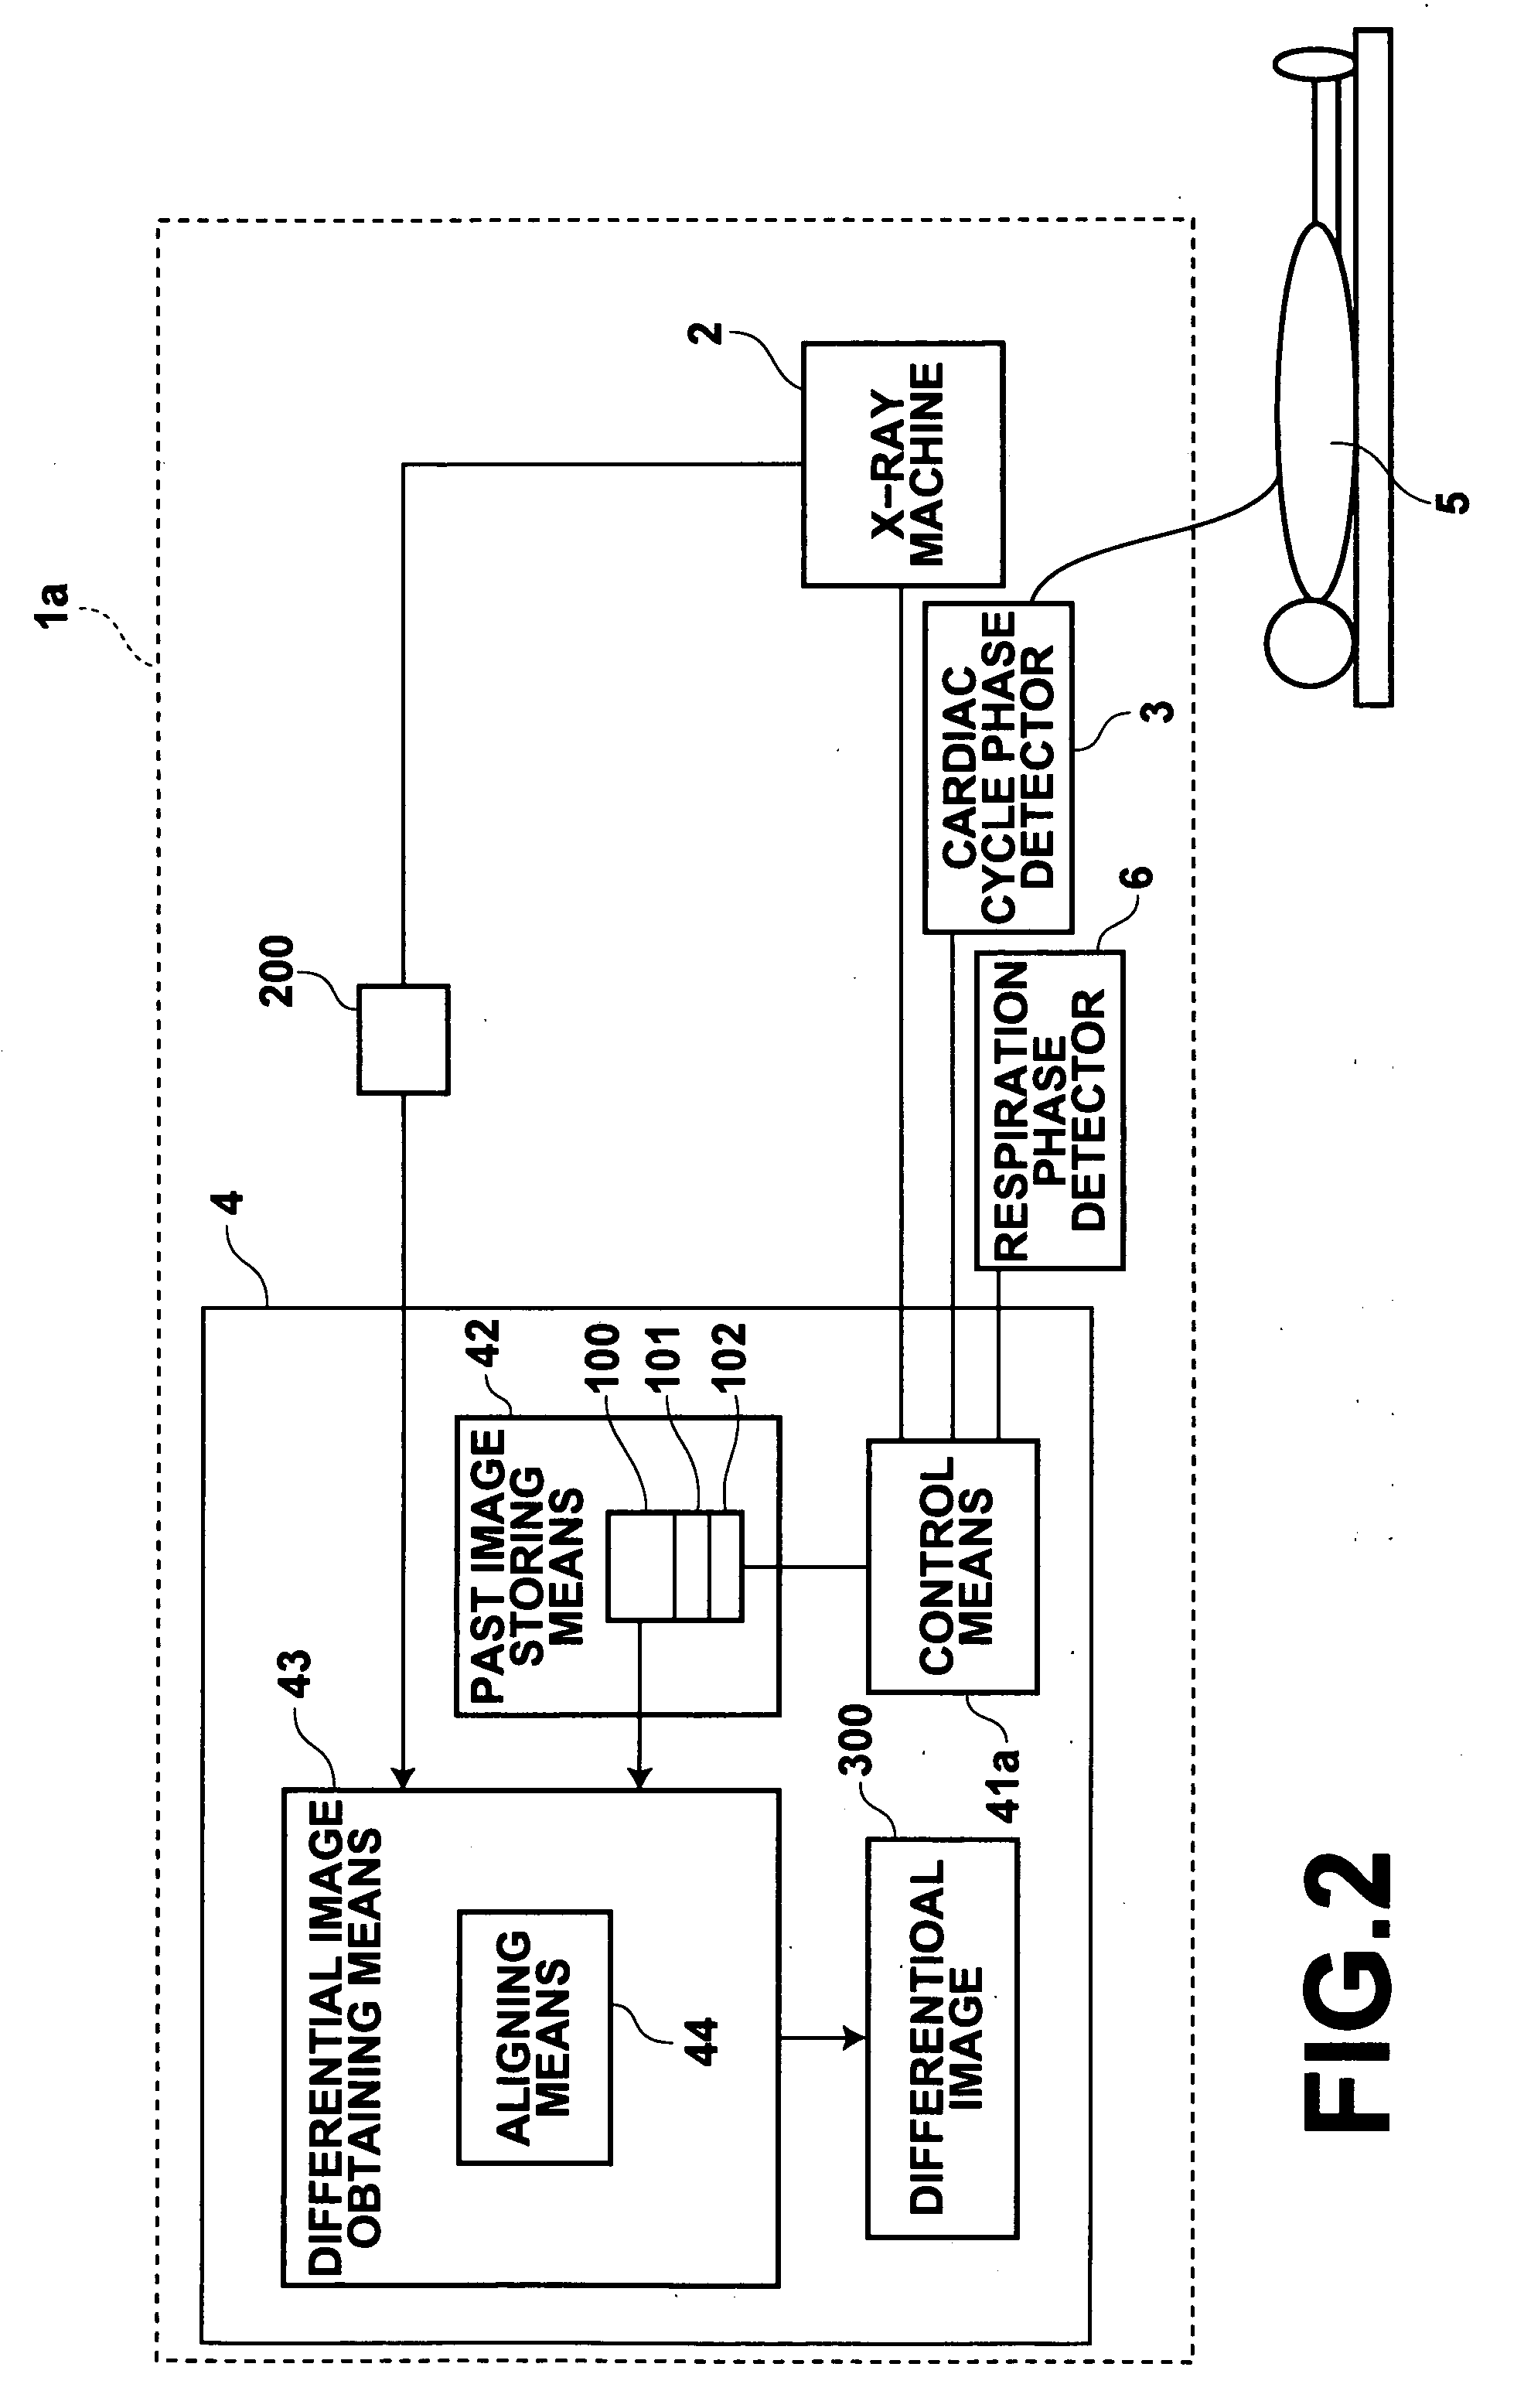 Method, apparatus and program for obtaining differential image